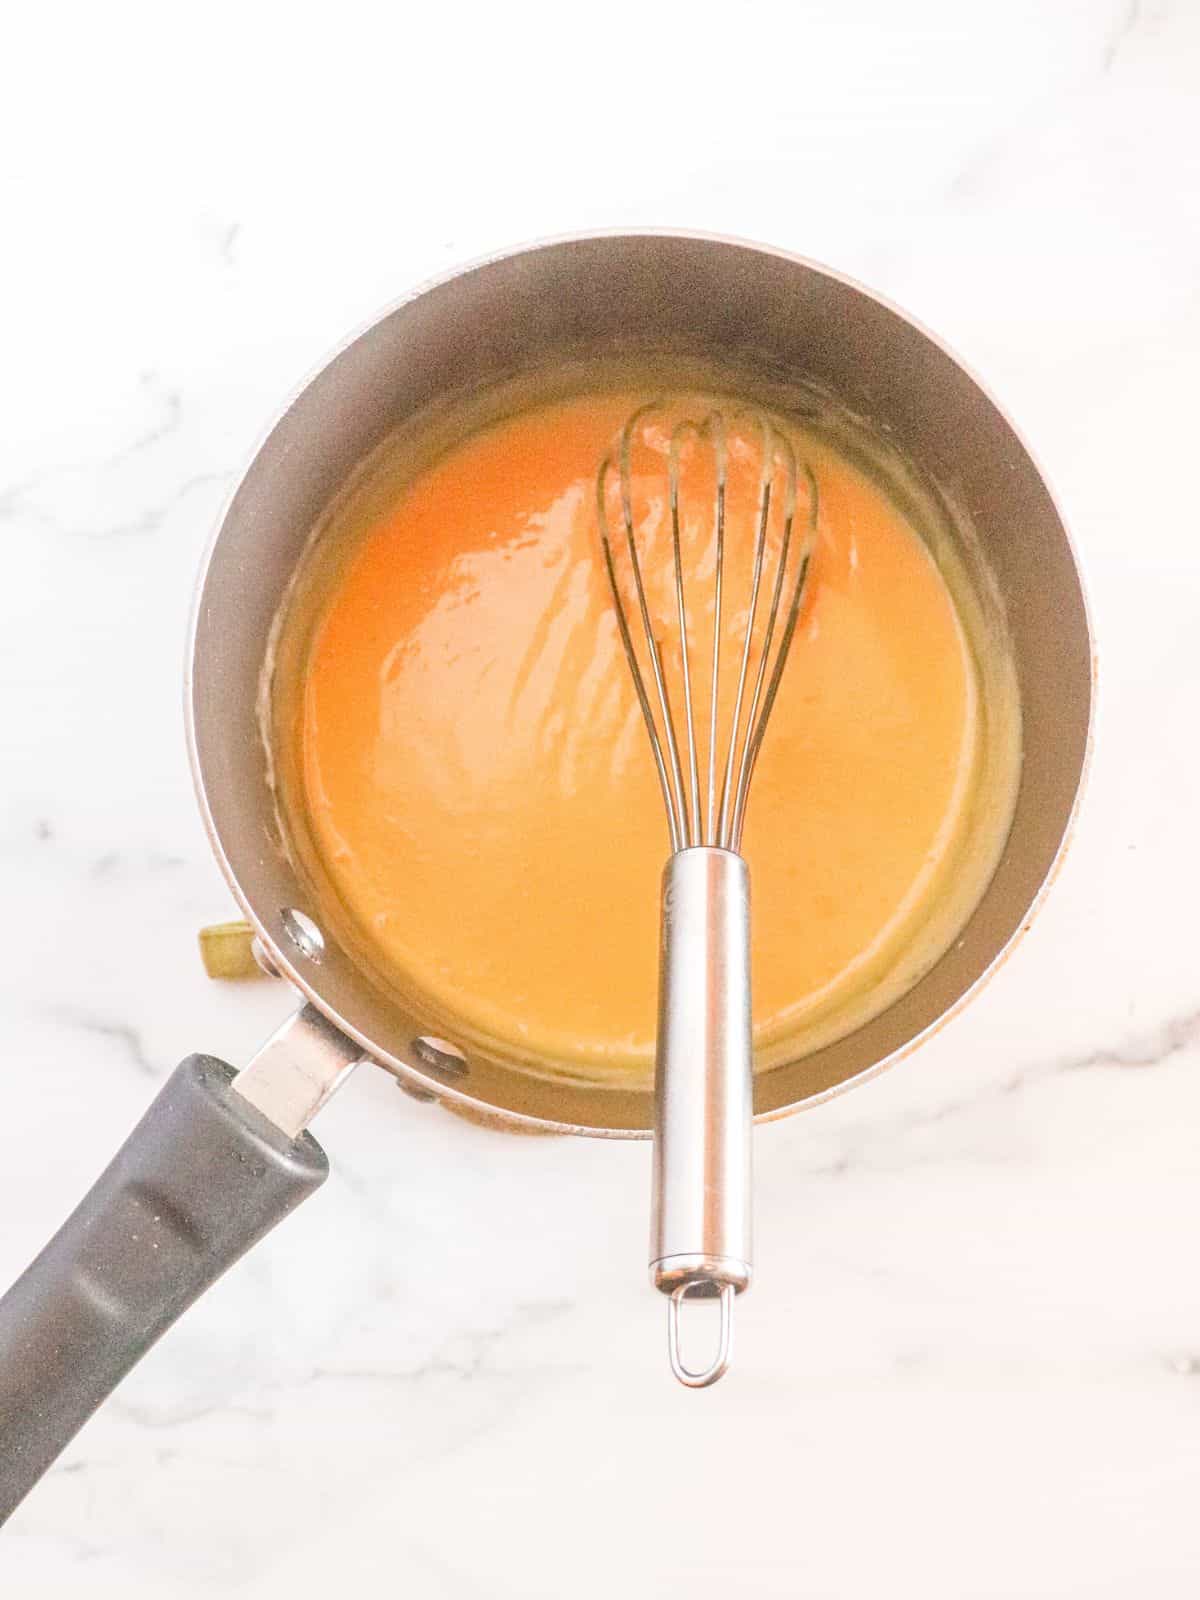 Nonstick pan with whisk and custard inside